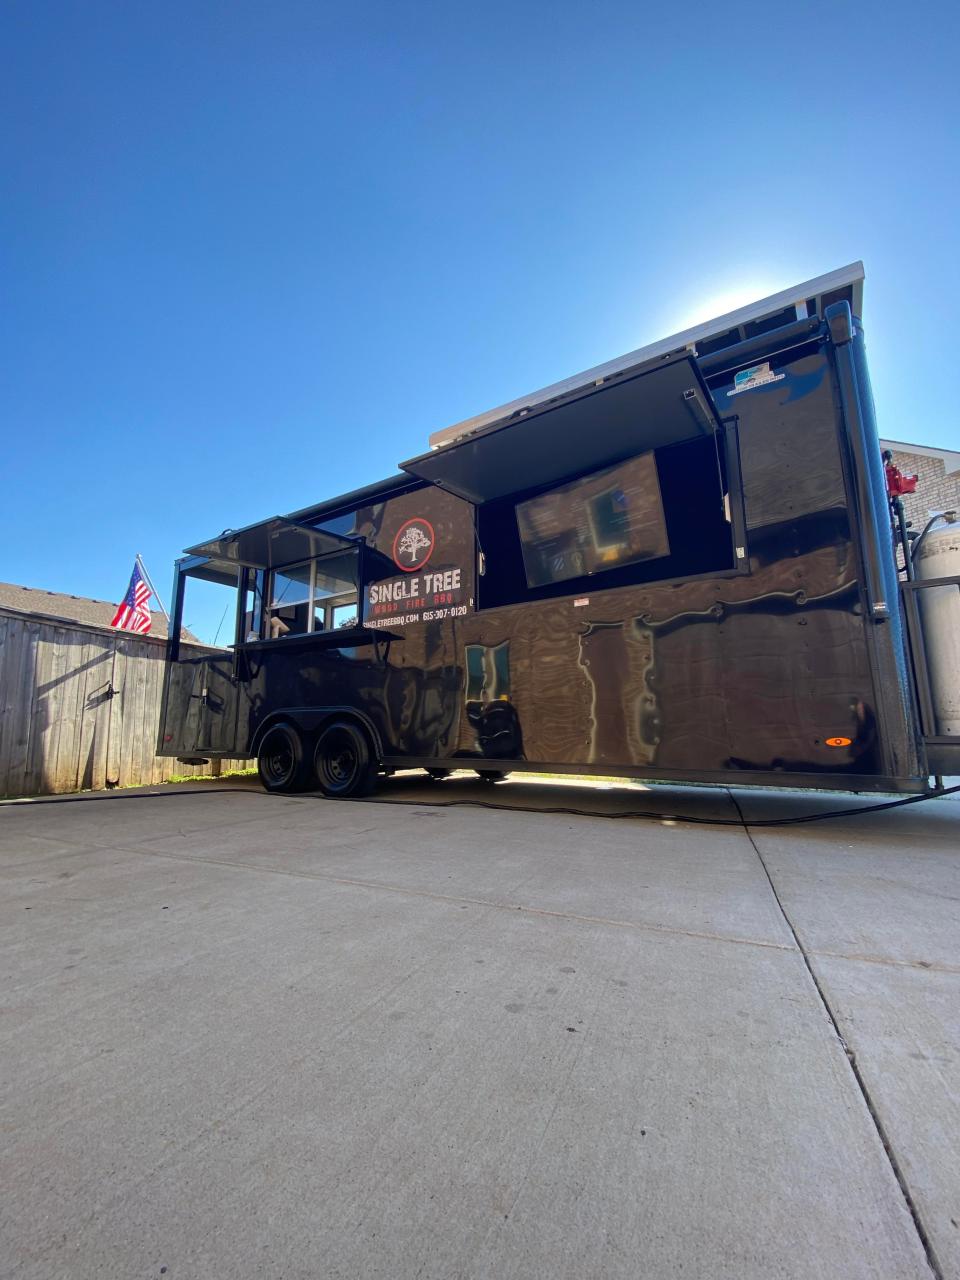 Single Tree BBQ started off as a food truck, traveling around Middle Tennessee and serving food from parking lots. They specialize in low and slow-cooking meat. All of the recipes are easy and prepared from scratch.